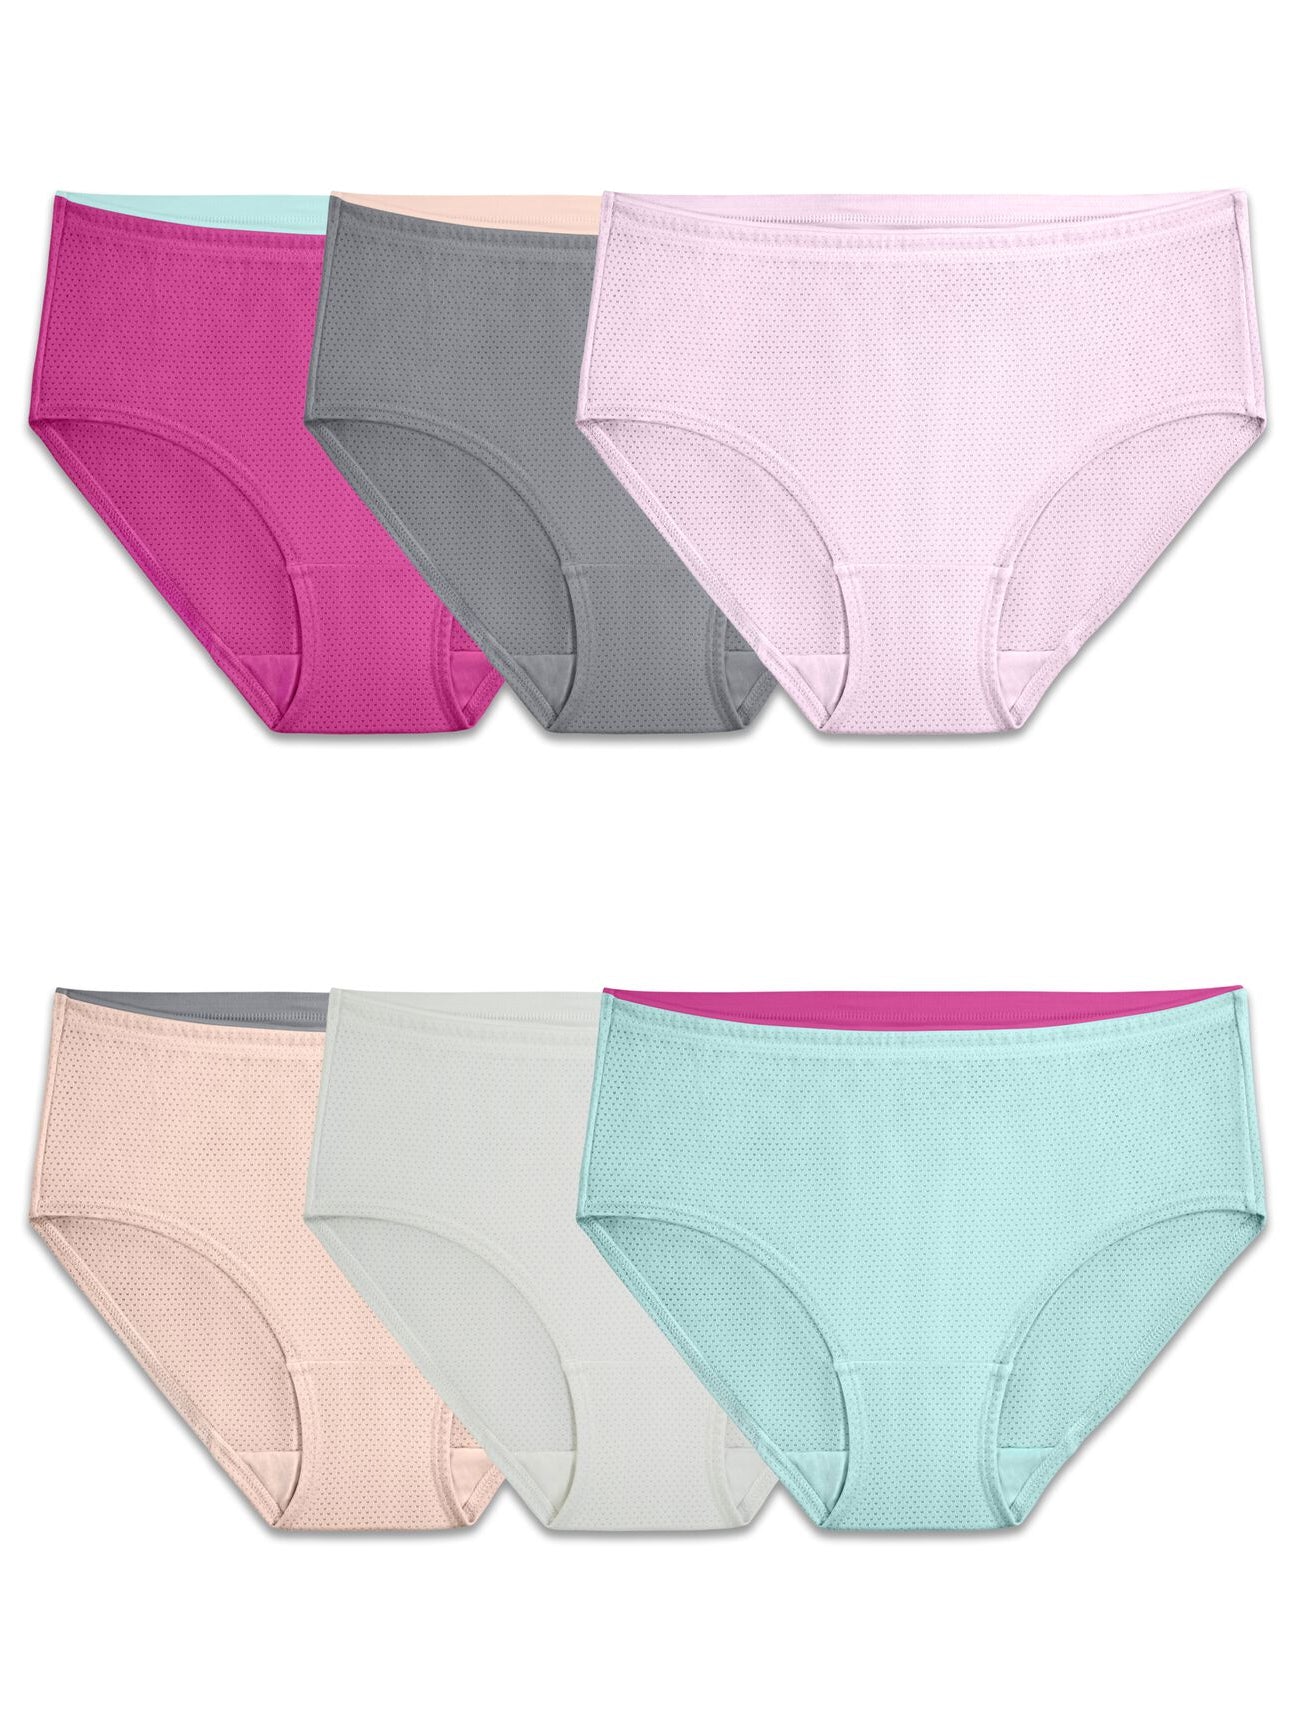 HIBRO Underwear Size 6 Girls Underwear Cotton Briefs Clear Color Briefs  Solid Color Panties For Teens Pack Of 3